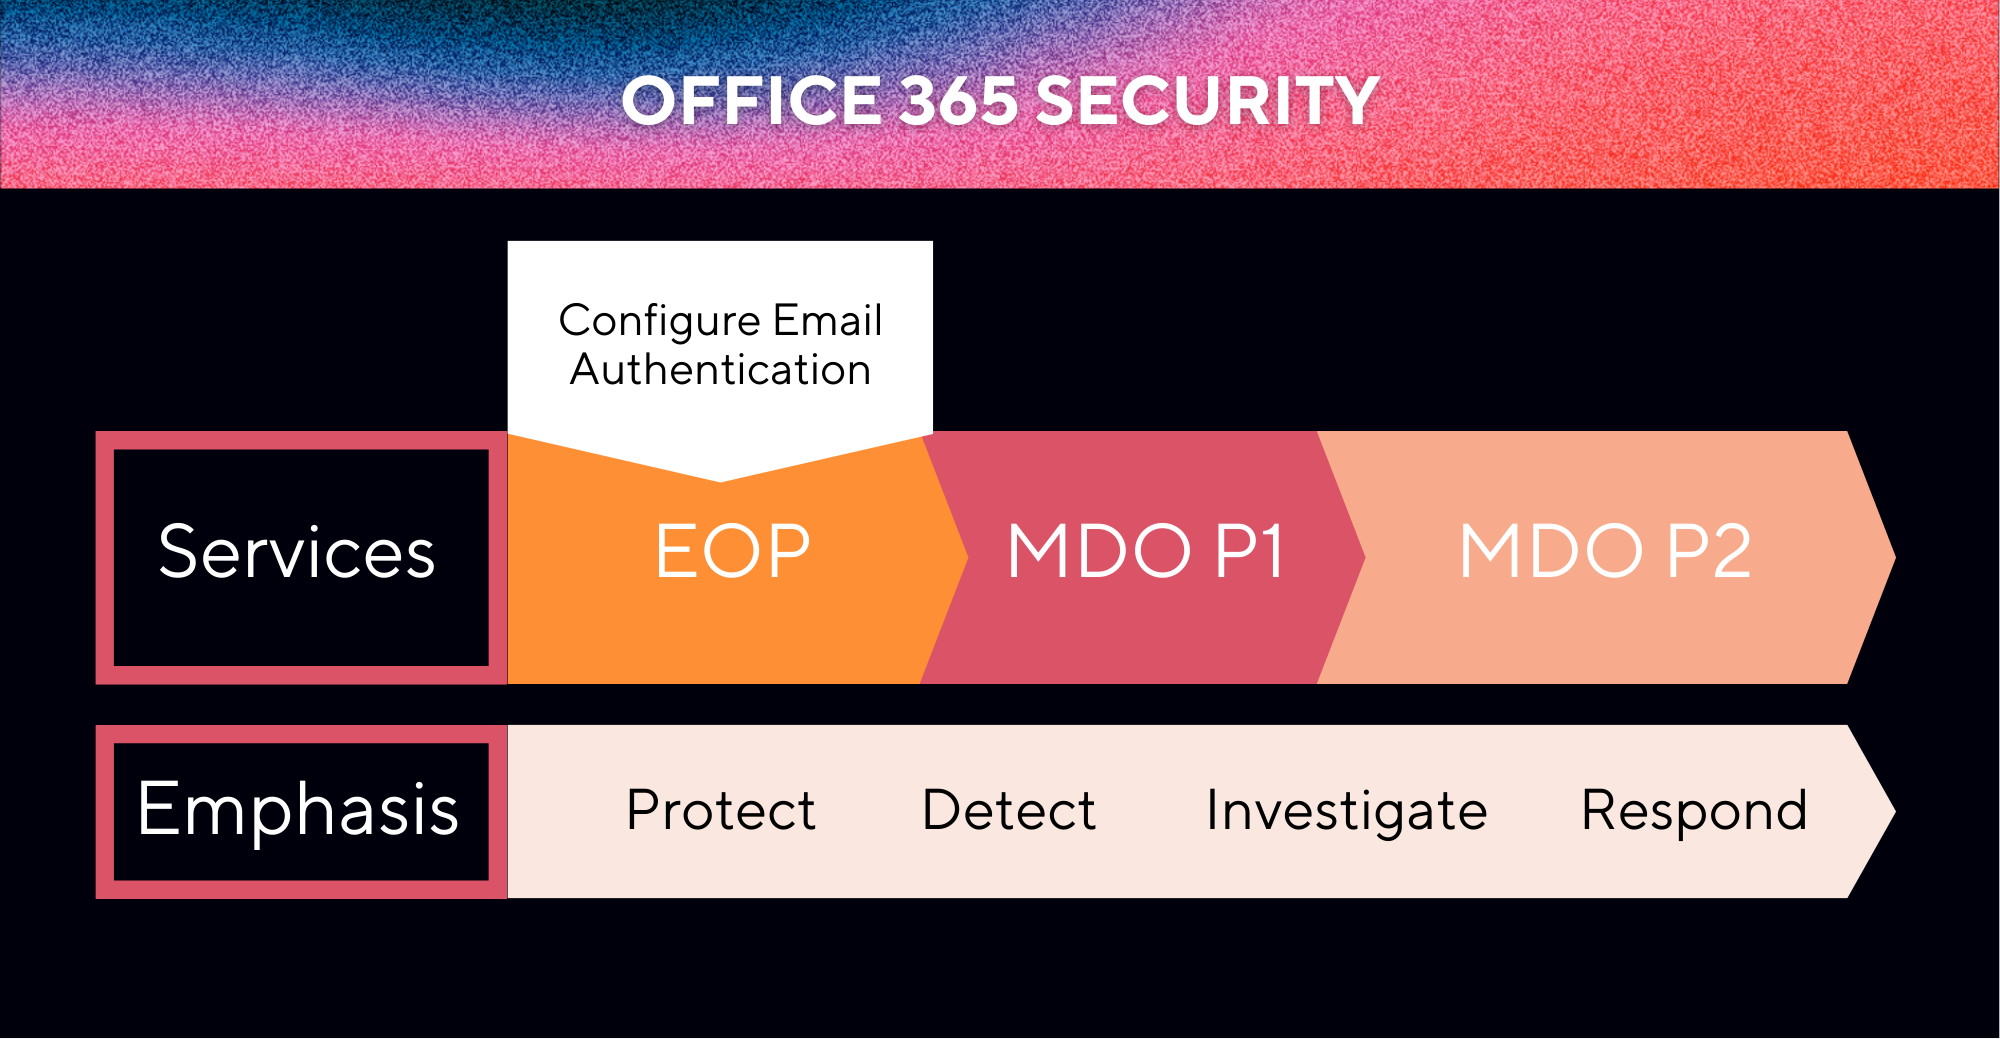 "office 365 security"